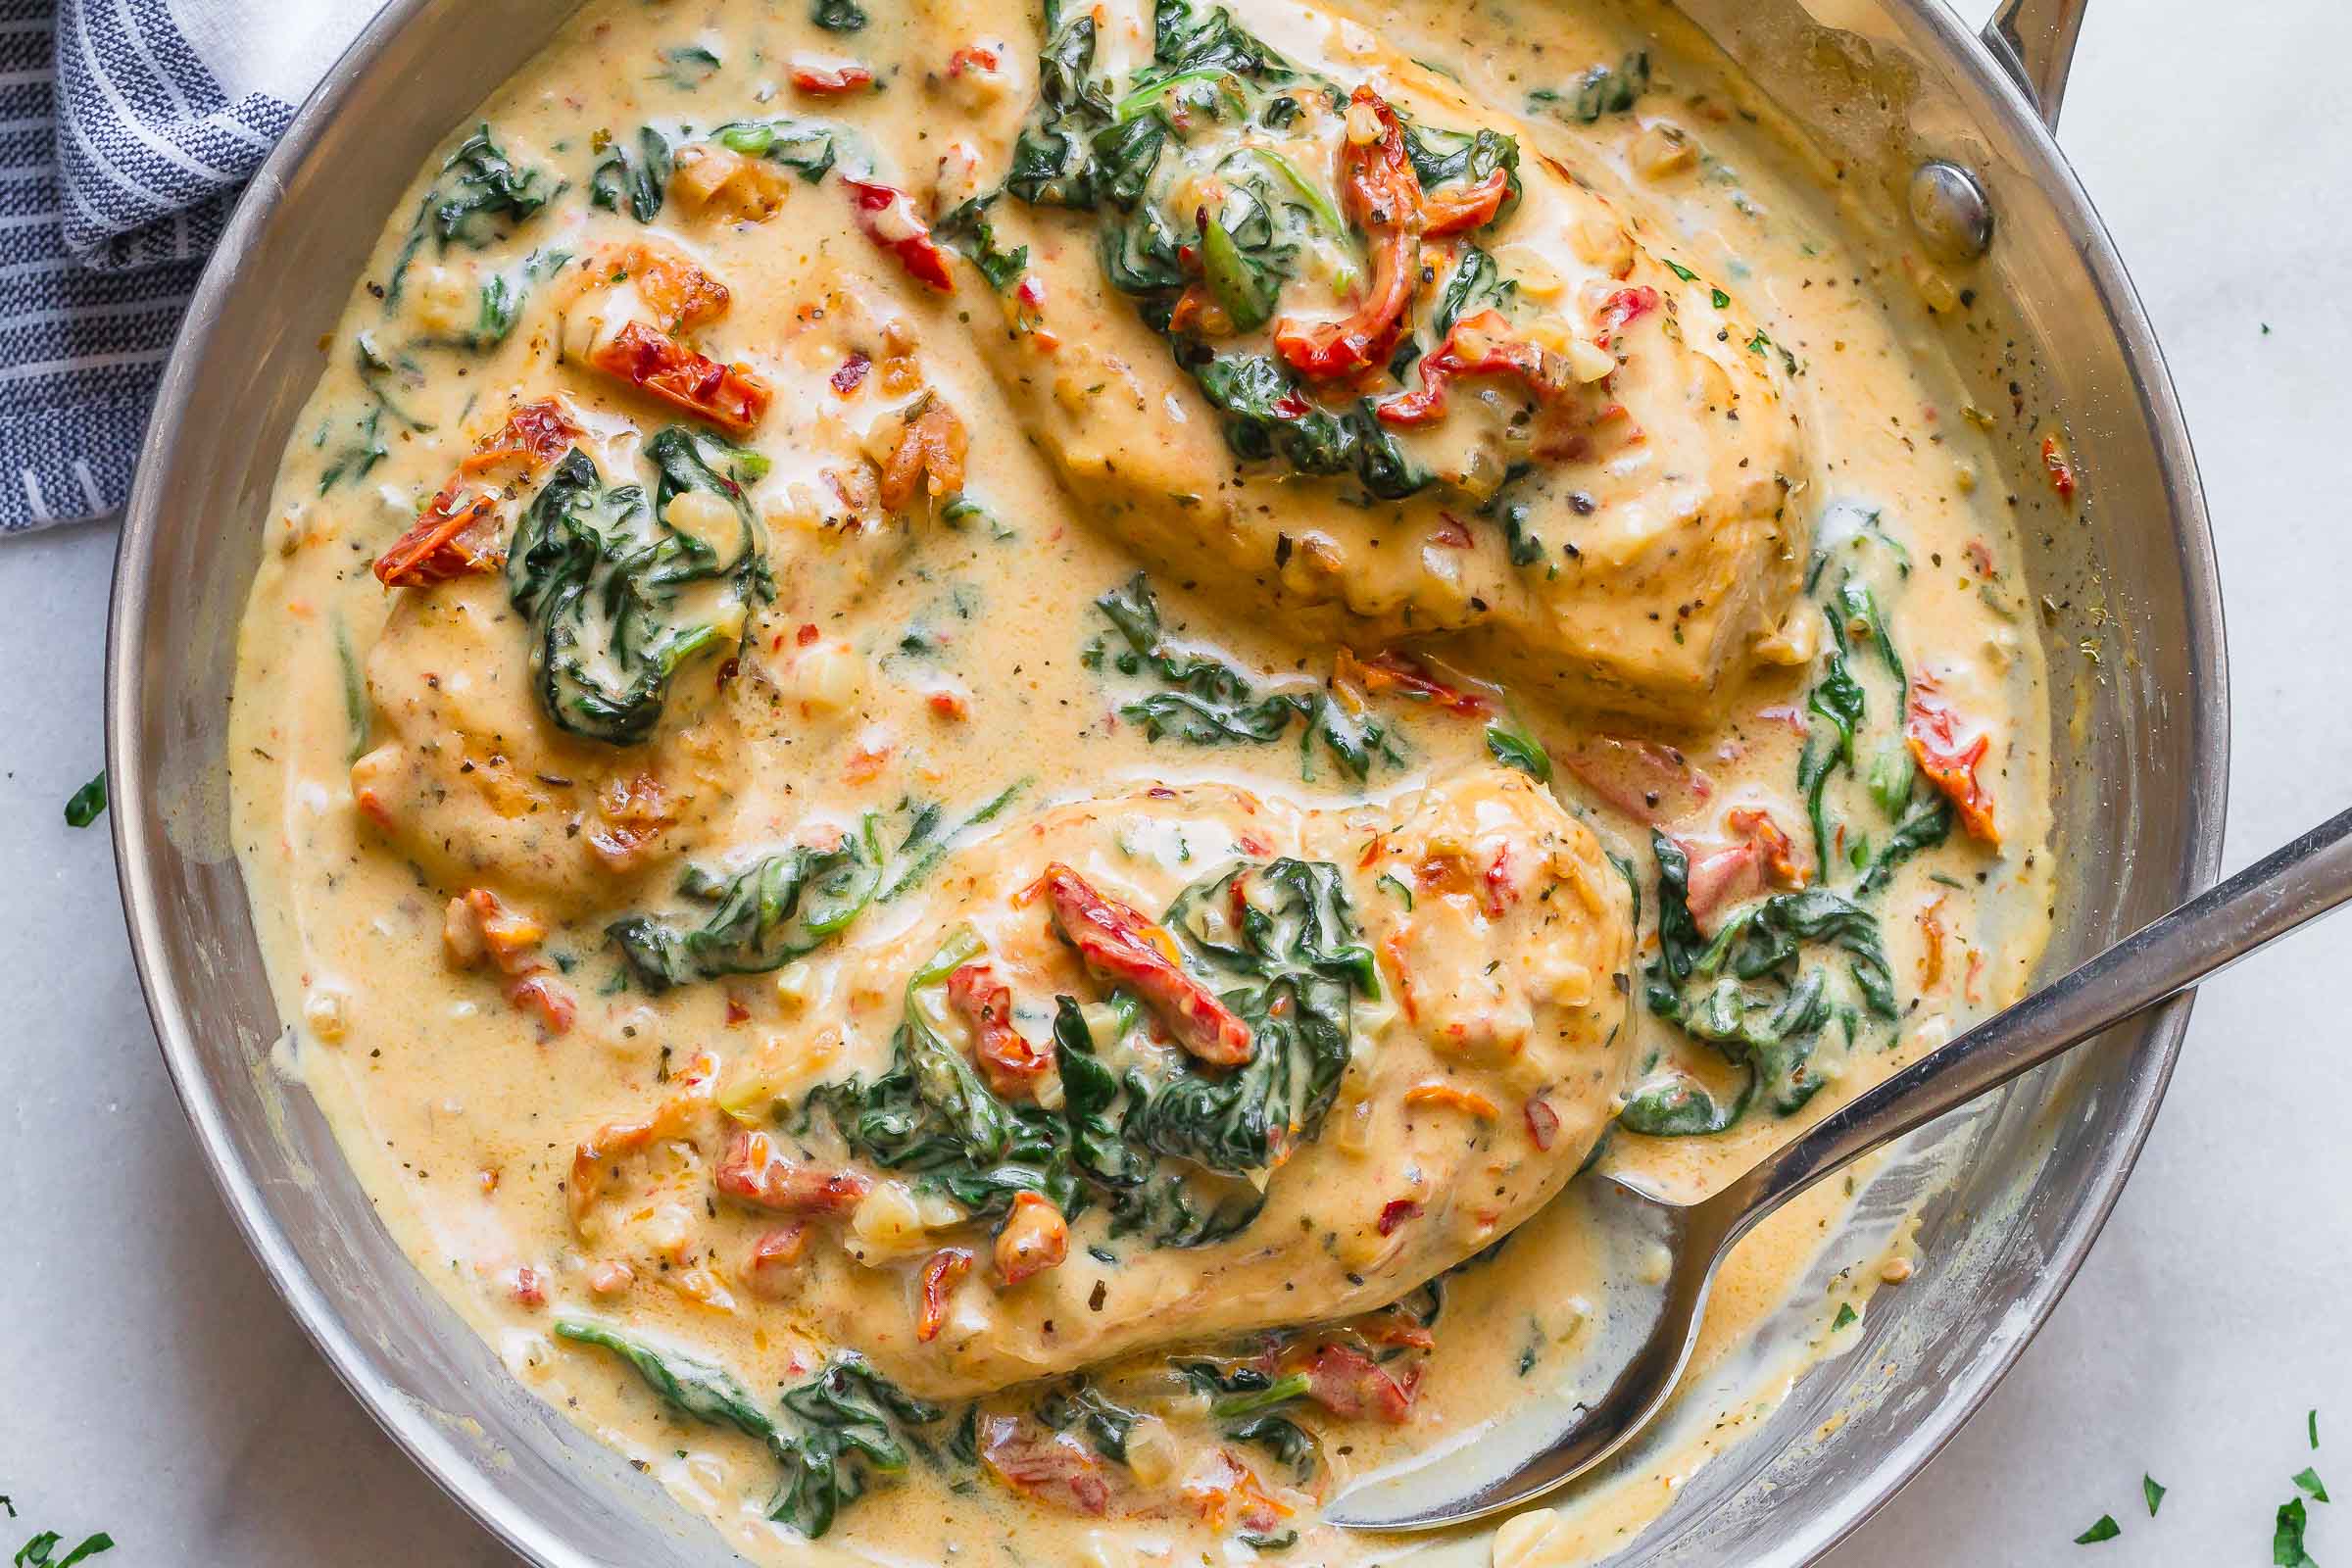 33 Best Chicken Breast Recipes & Ideas, What To Make with Chicken Breasts, Recipes, Dinners and Easy Meal Ideas